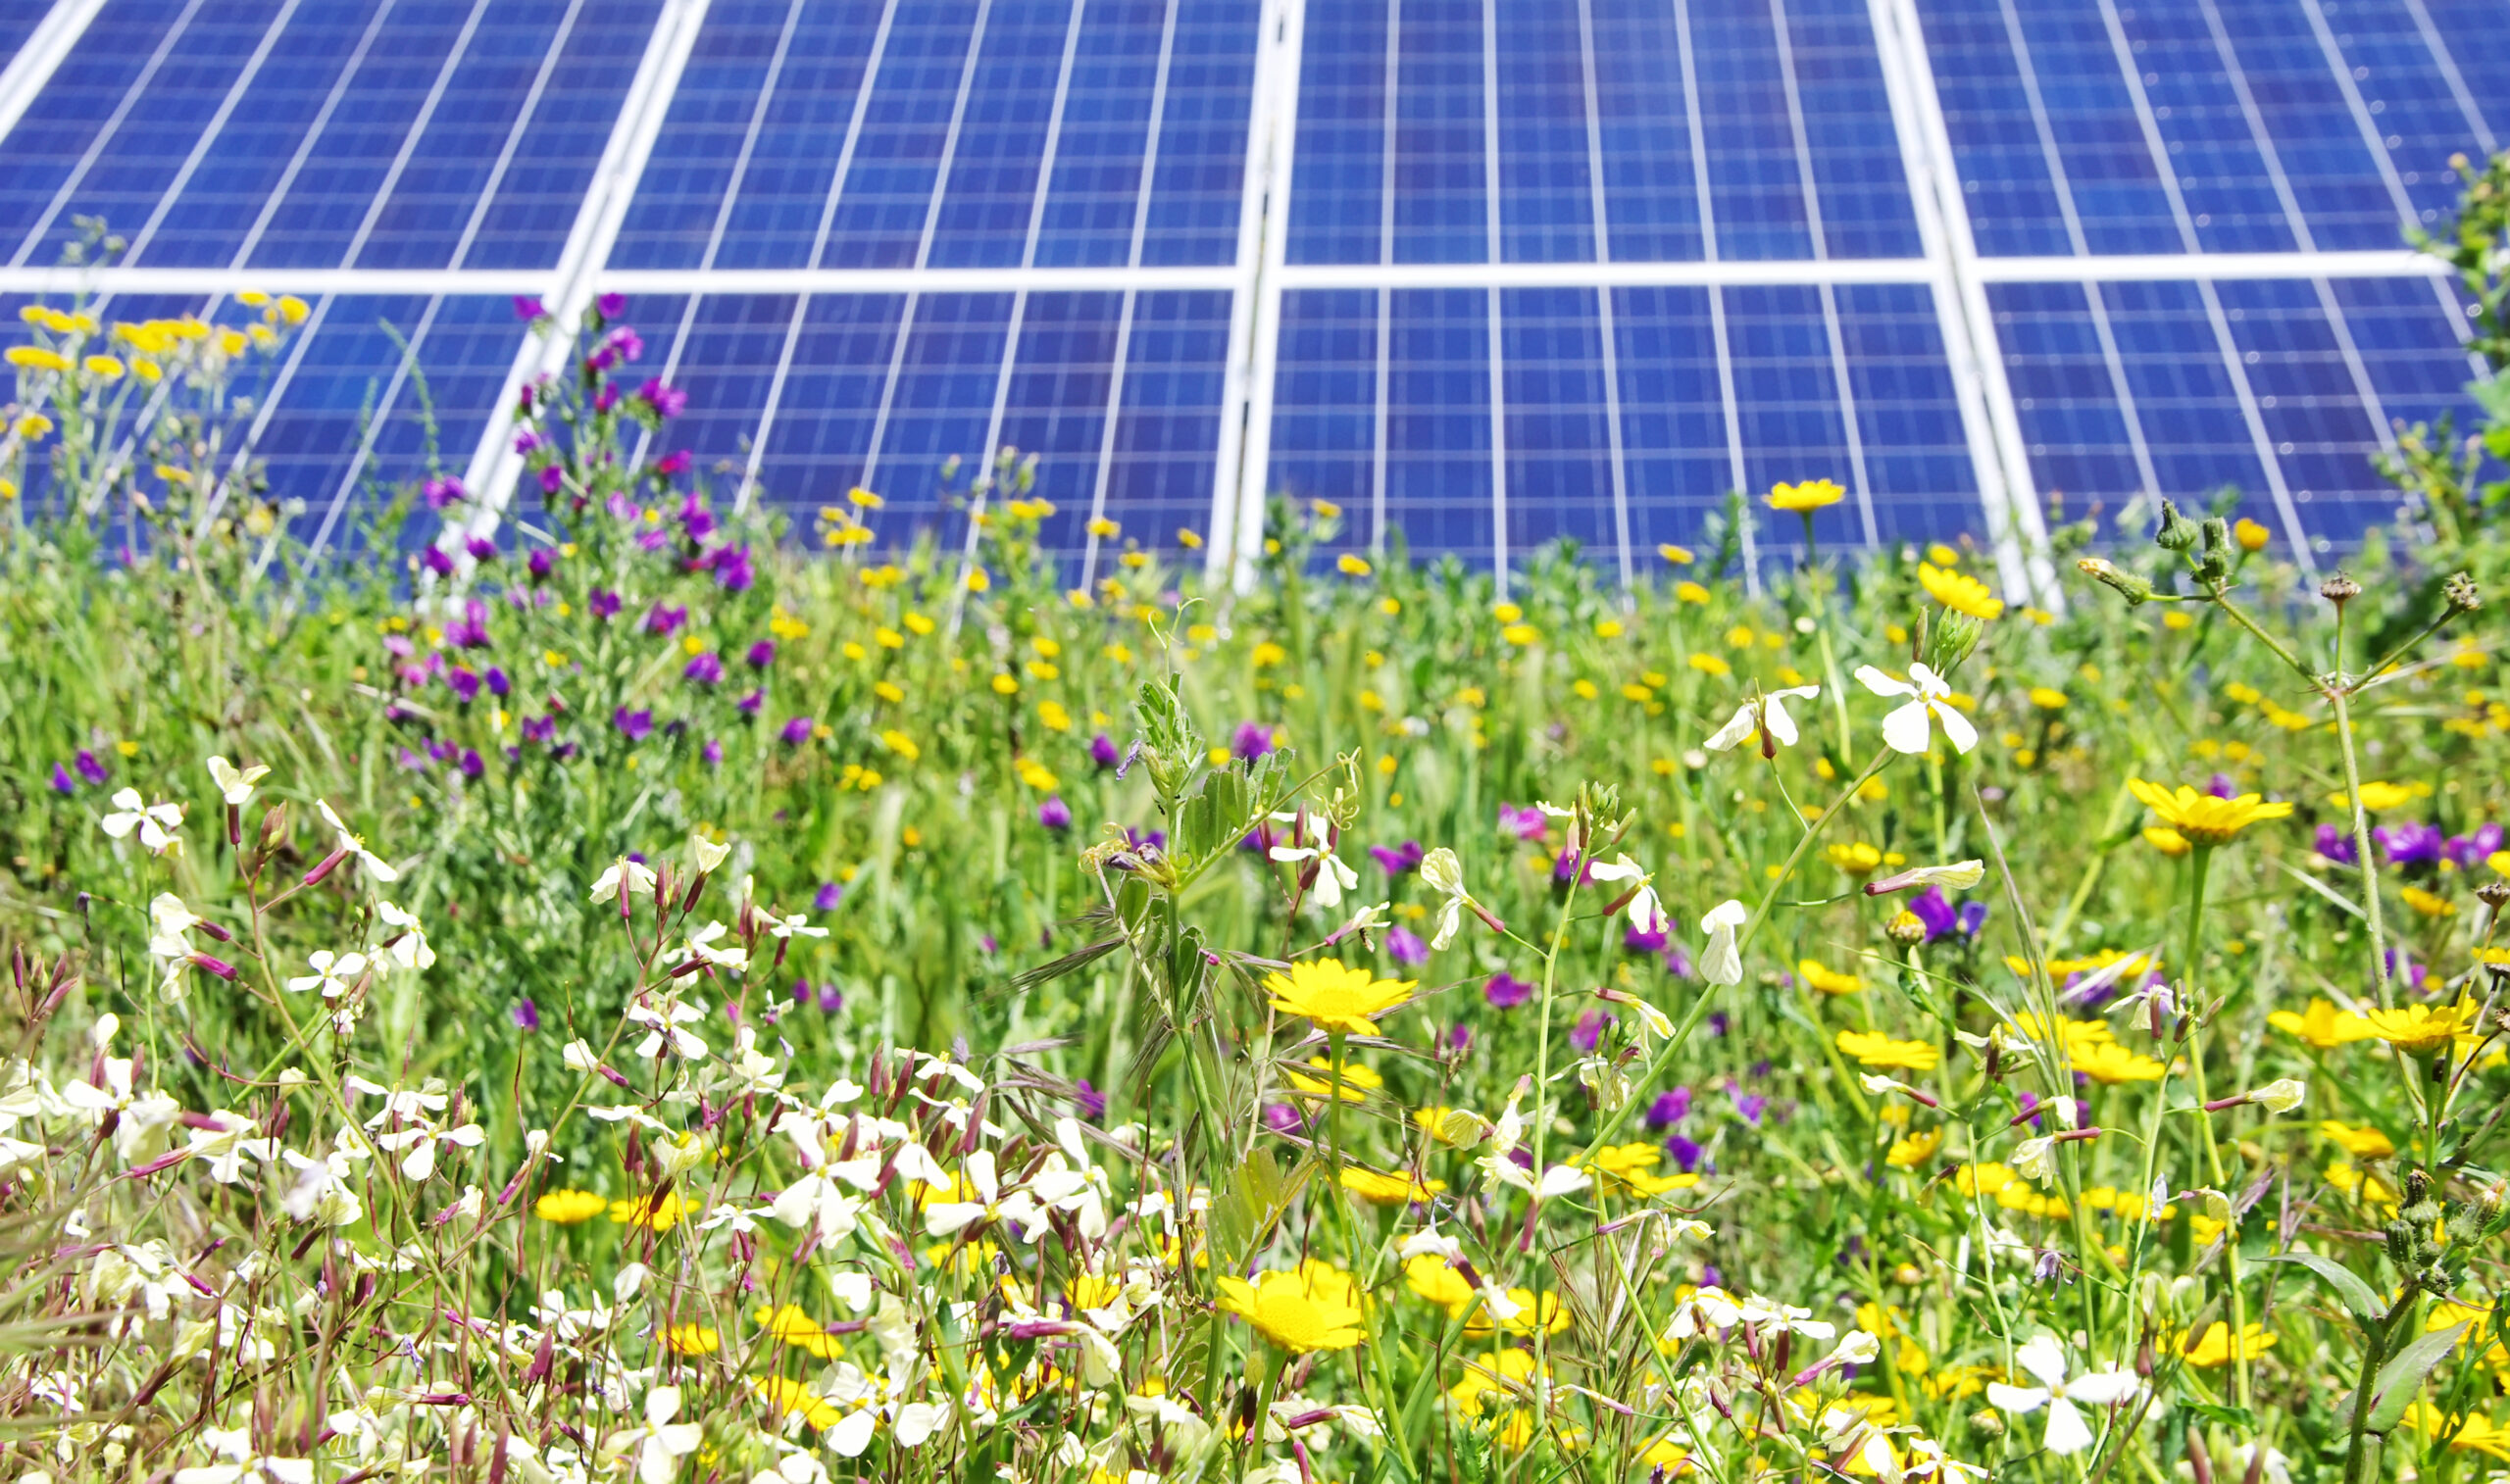 Photovoltaic panels and wild flowers